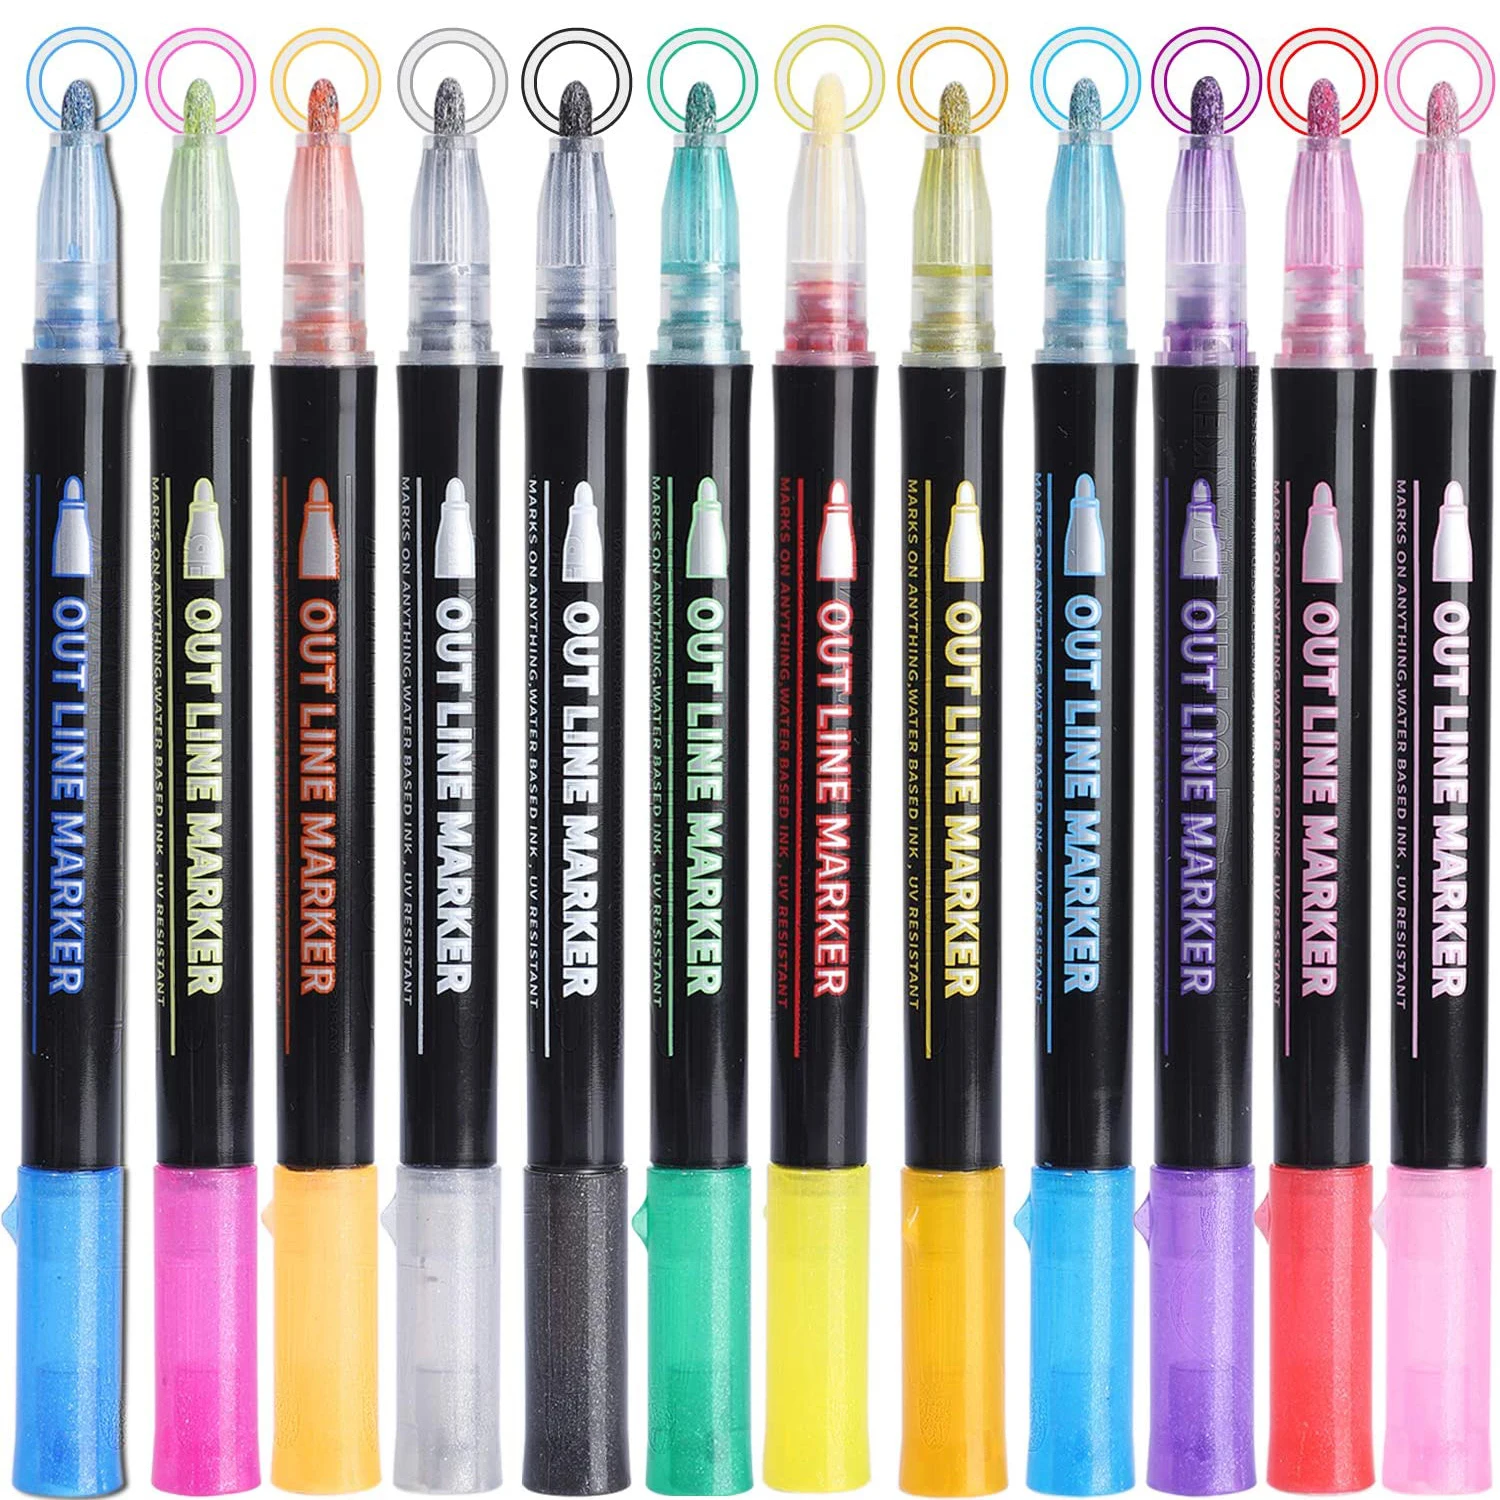 Shimmer Markers Outline Double Line: 24 Colors Glitter Metallic Pen Set  Super Squiggles Sparkle Cool Fun Fancy Self Sparkly Kids Age 4 8 10 12 Girl